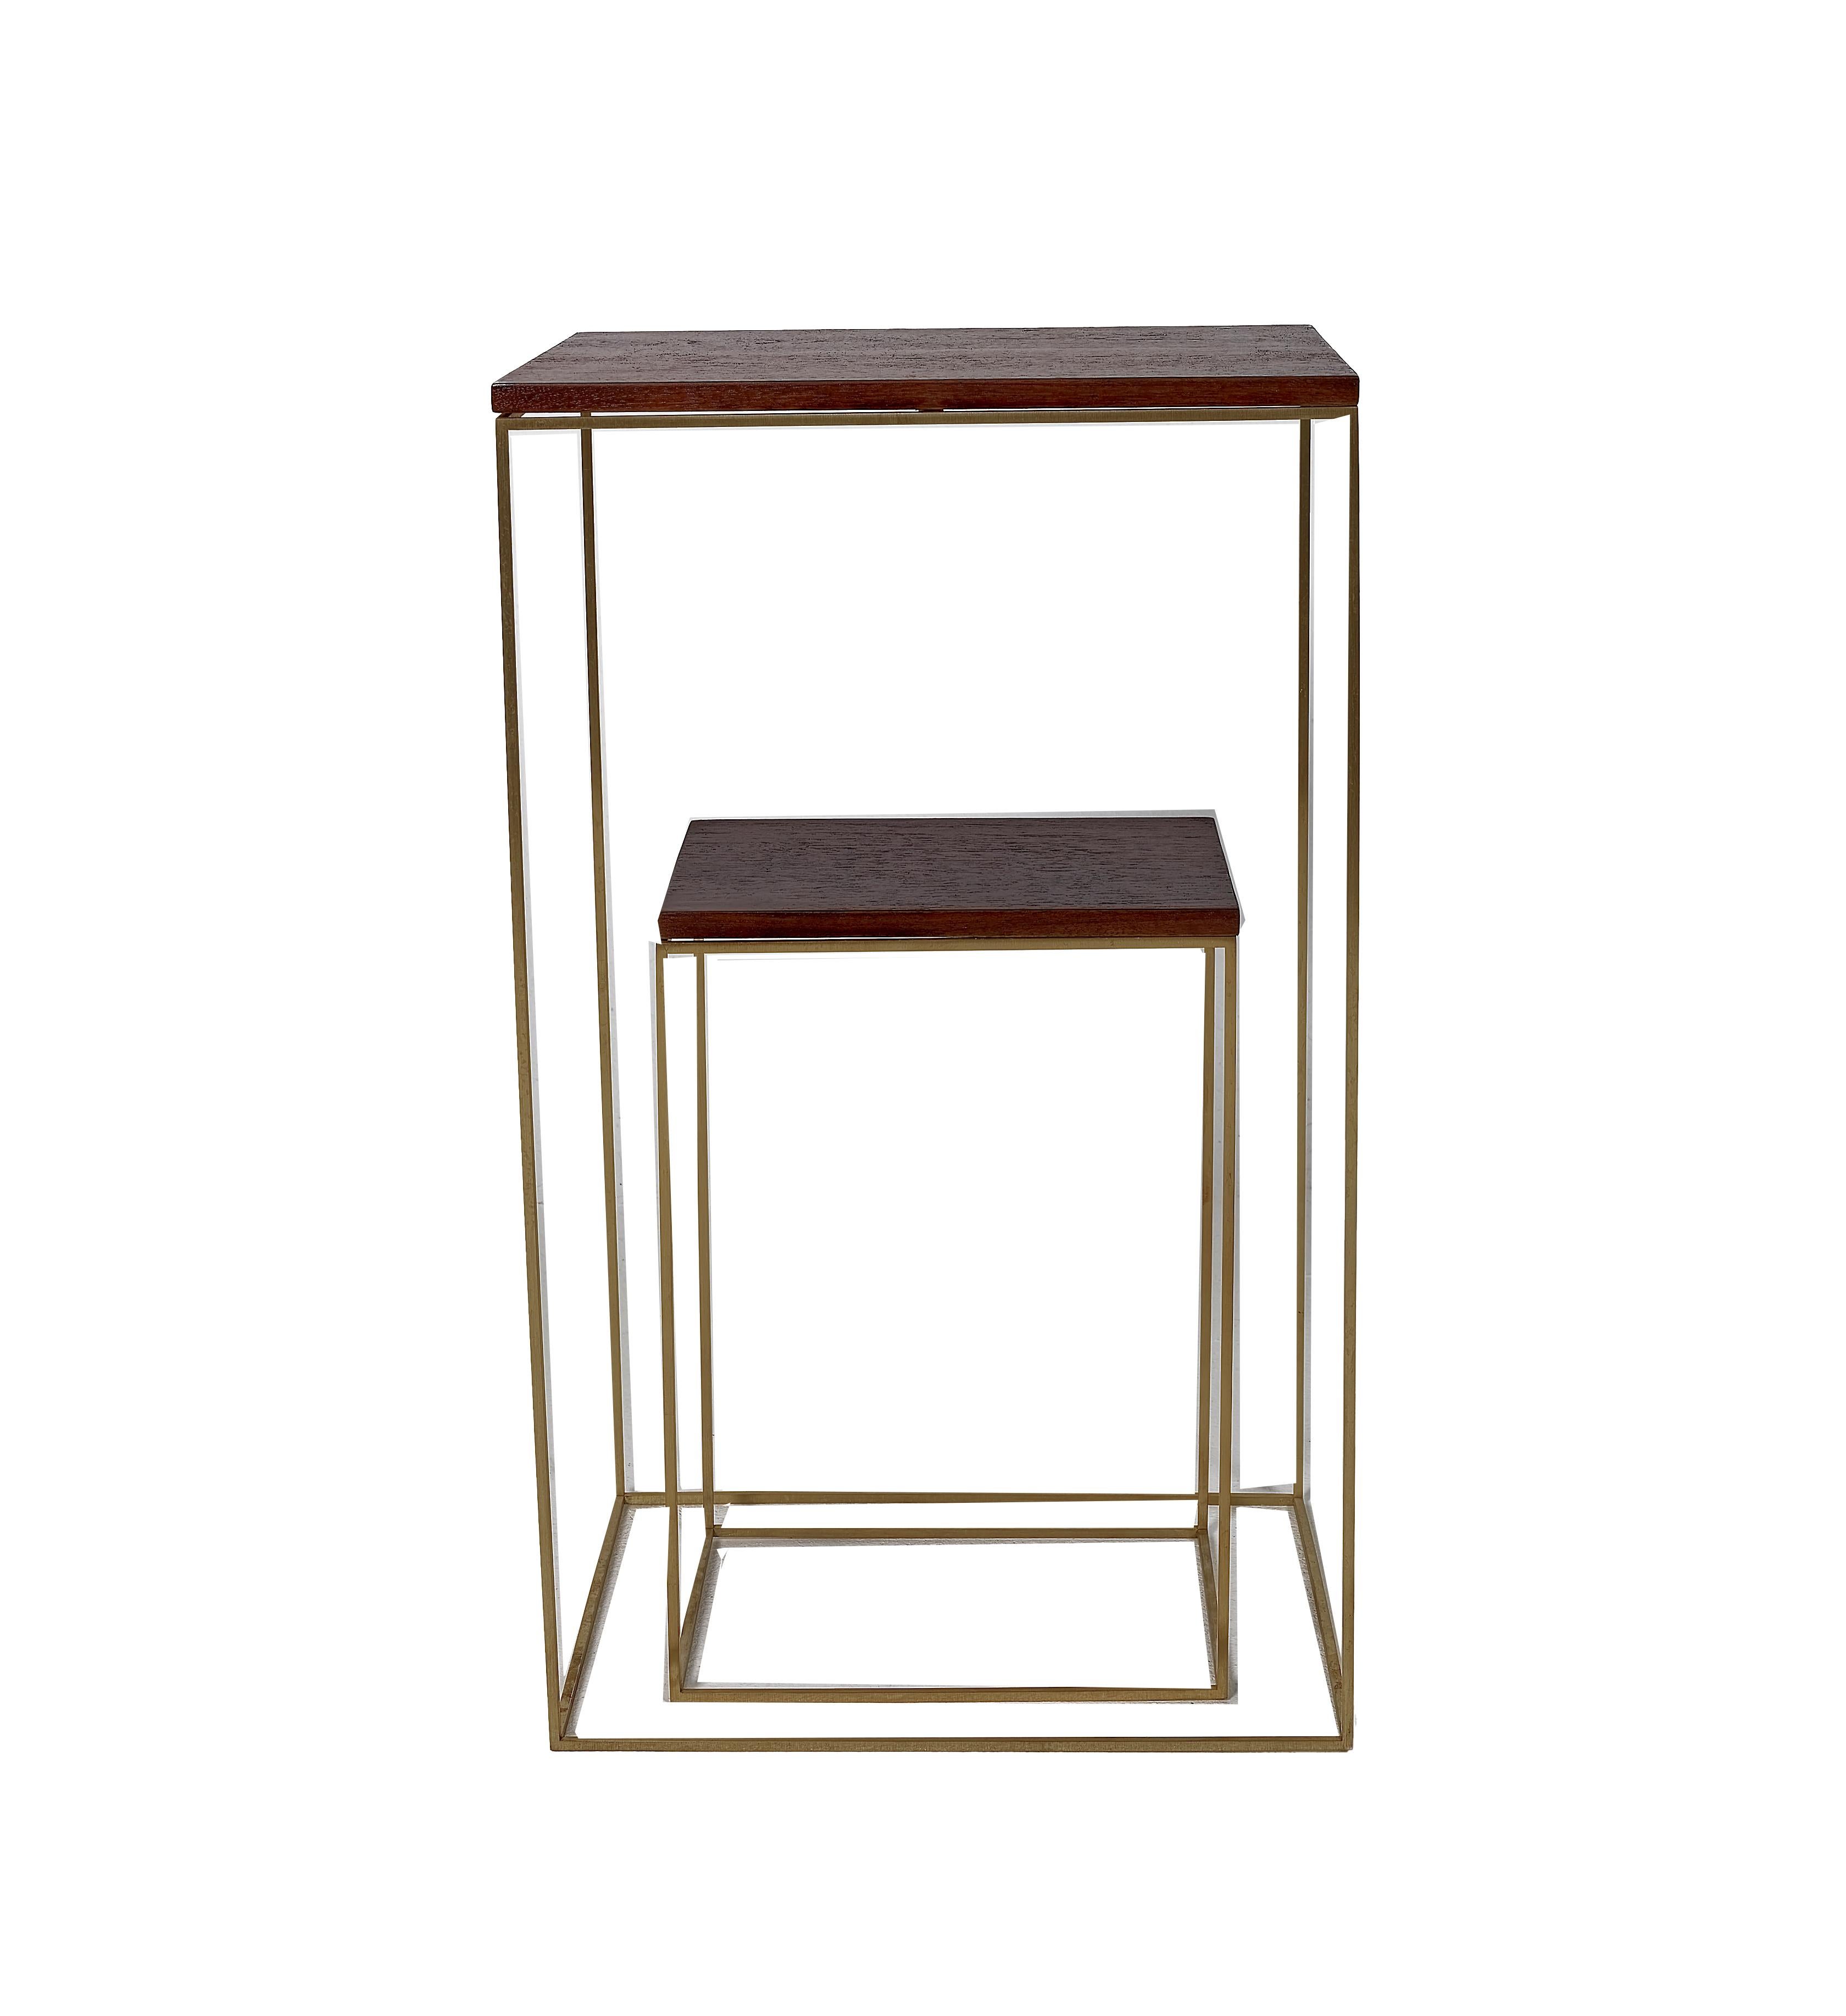 Walnut and Brass Side Tables. Fine lightweight tables with brass base and walnut veneered tops. Tops sit on base and are held in position by four pins. Tables are not built for heavy items, good for light lamps, books and sculptures.
In total 3